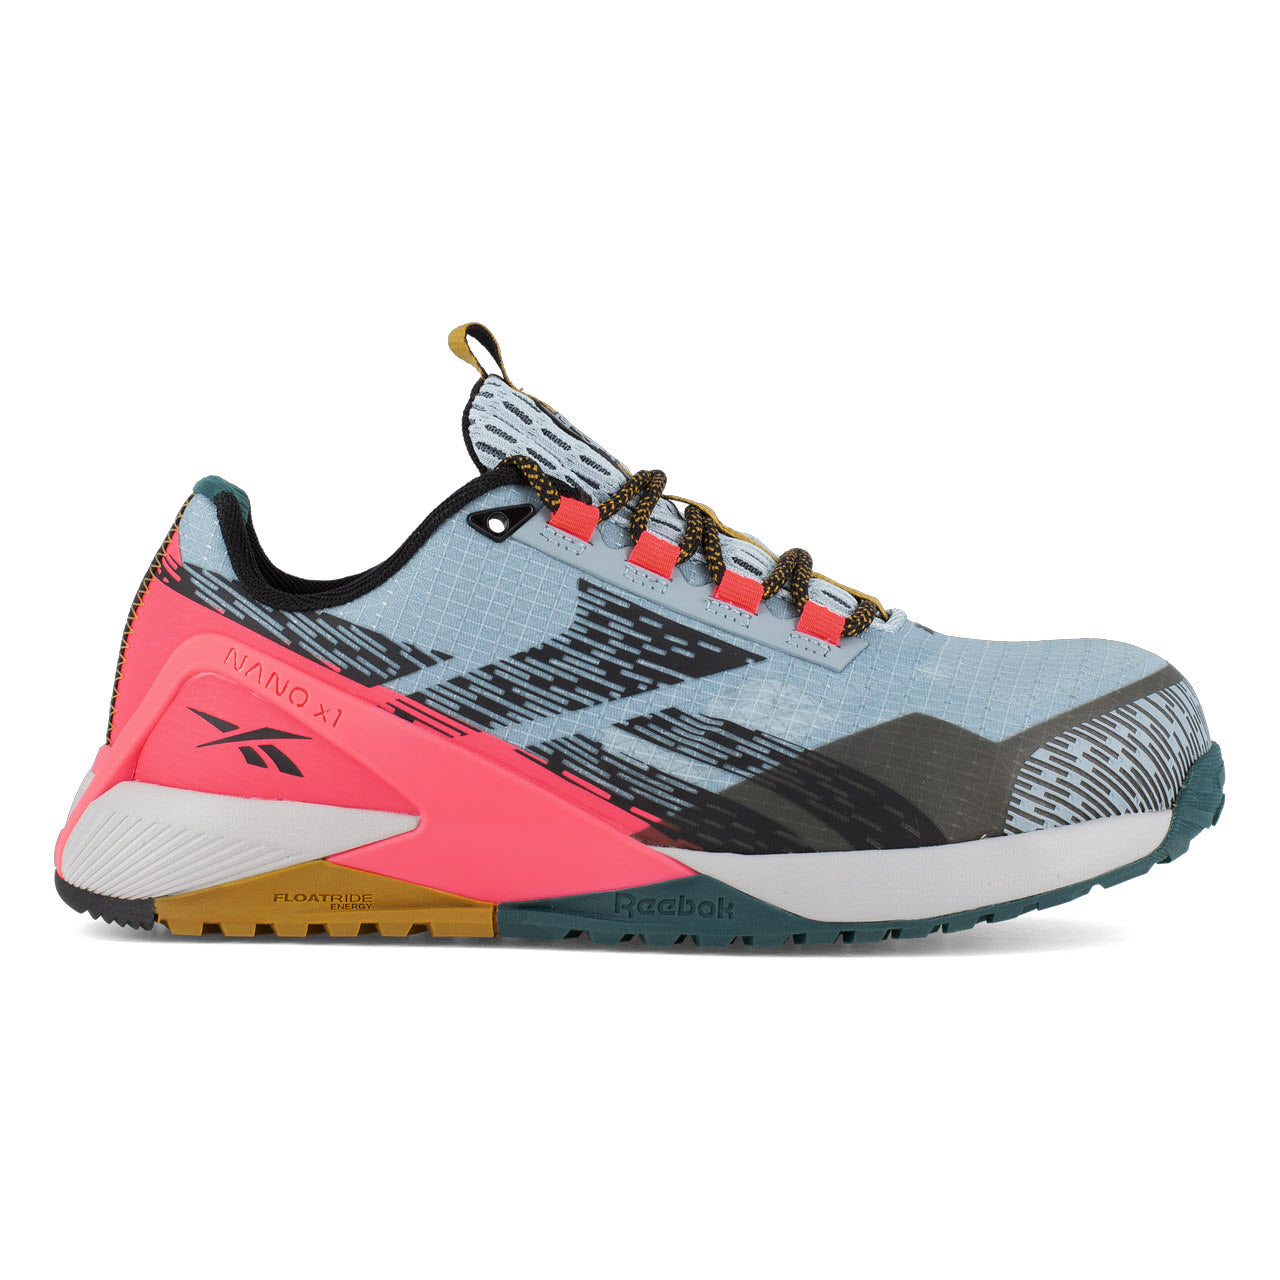 Side view of a Reebok Work Nano Low Comp Toe Slate Blue Cherry running shoe in blue and coral colors with a rugged sole and patterned design.